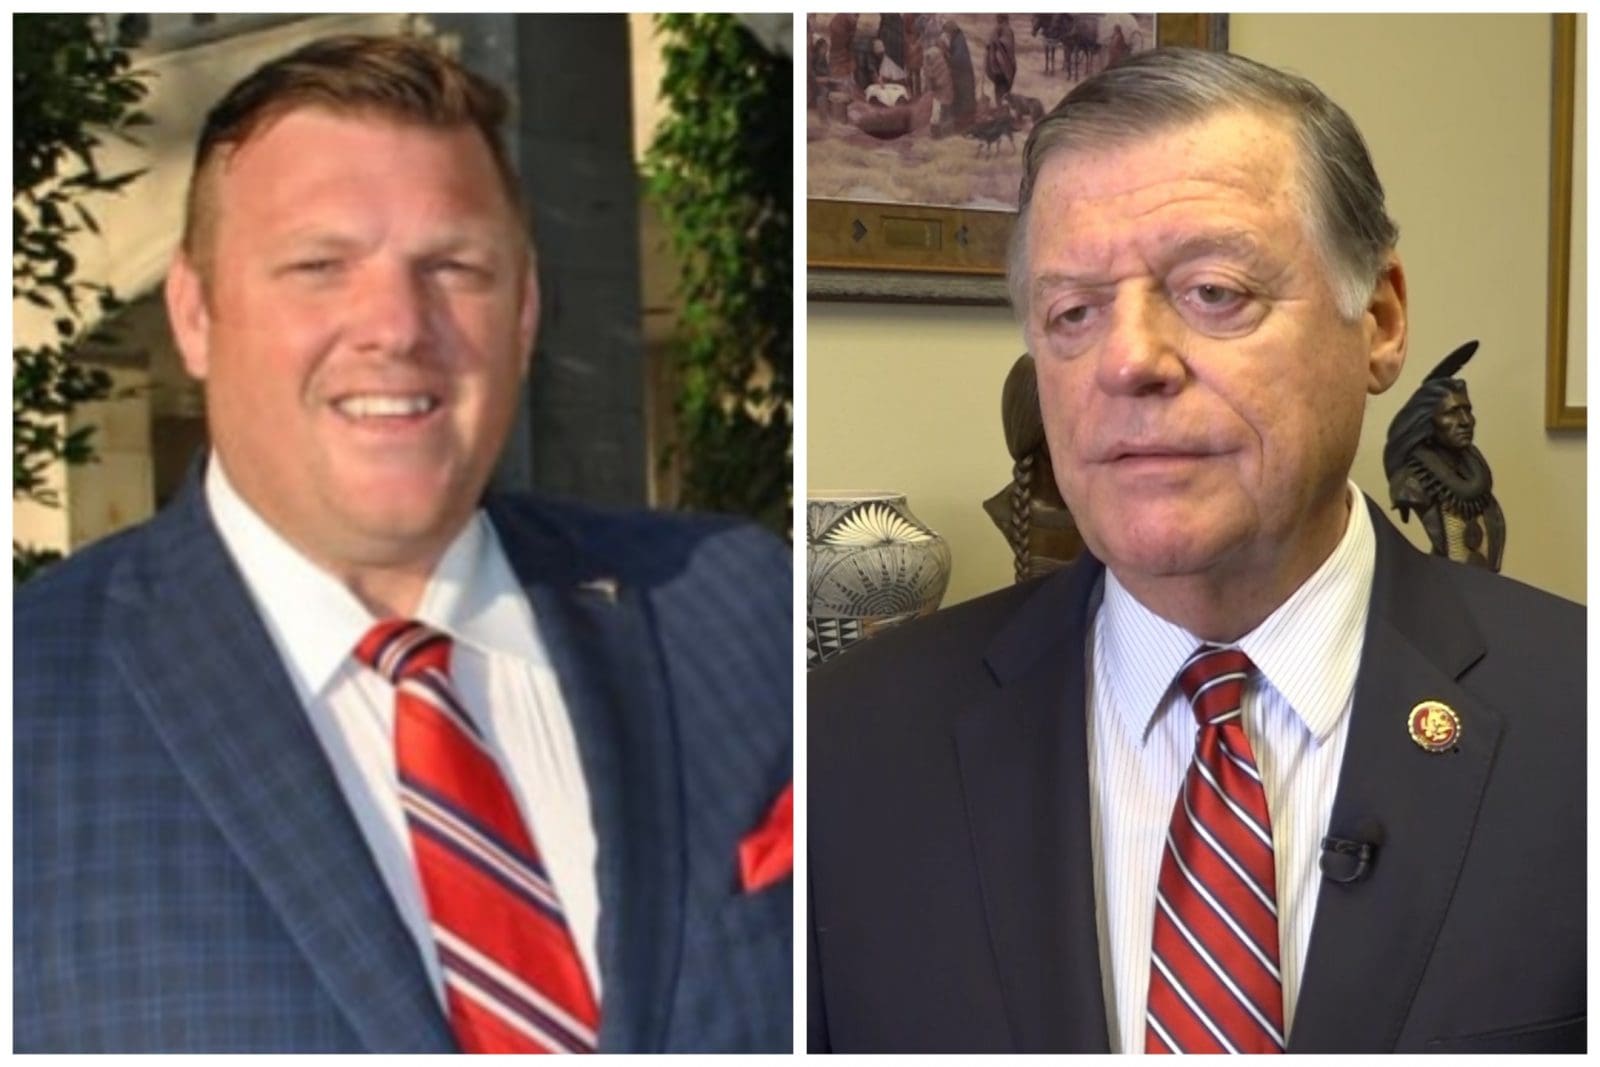 America First U.S. House Challenger Paul Bondar Sets the Record Straight Over FAKE NEWS From RINO Incumbent Tom Cole in Oklahoma’s 4th District Race [Video]